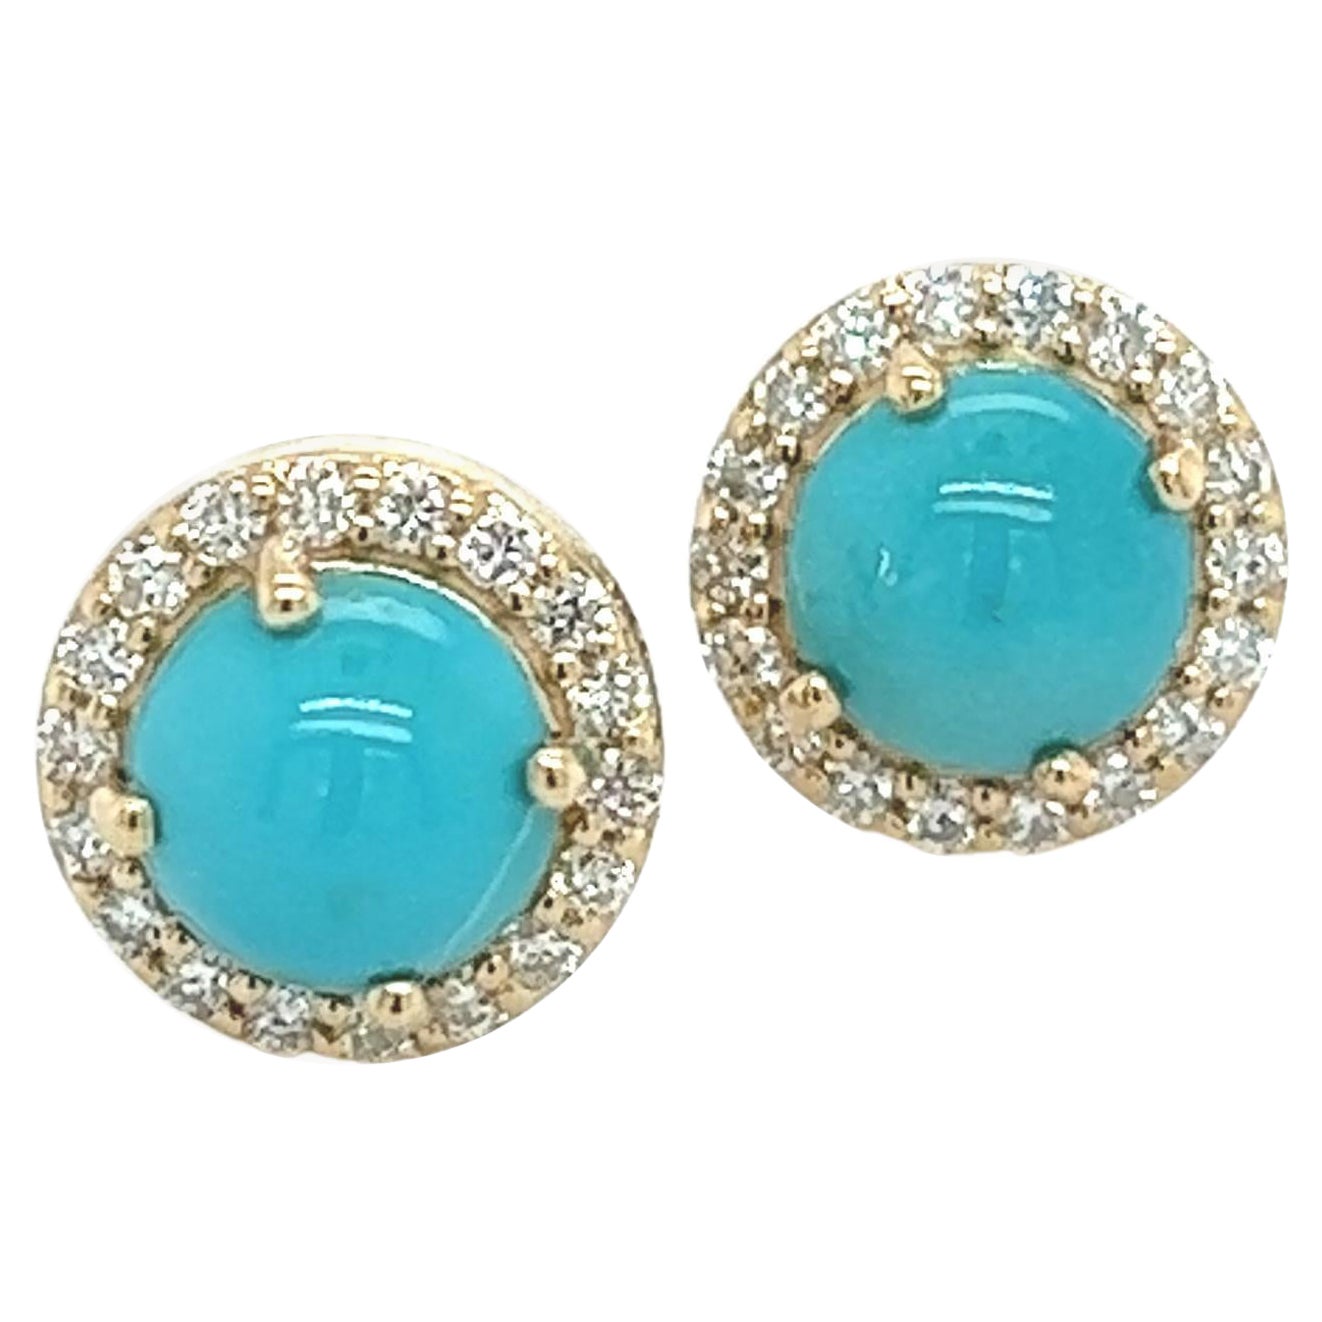 Natural Turquoise Diamond Stud Earrings 14k Yellow Gold 2.18 TCW Certified